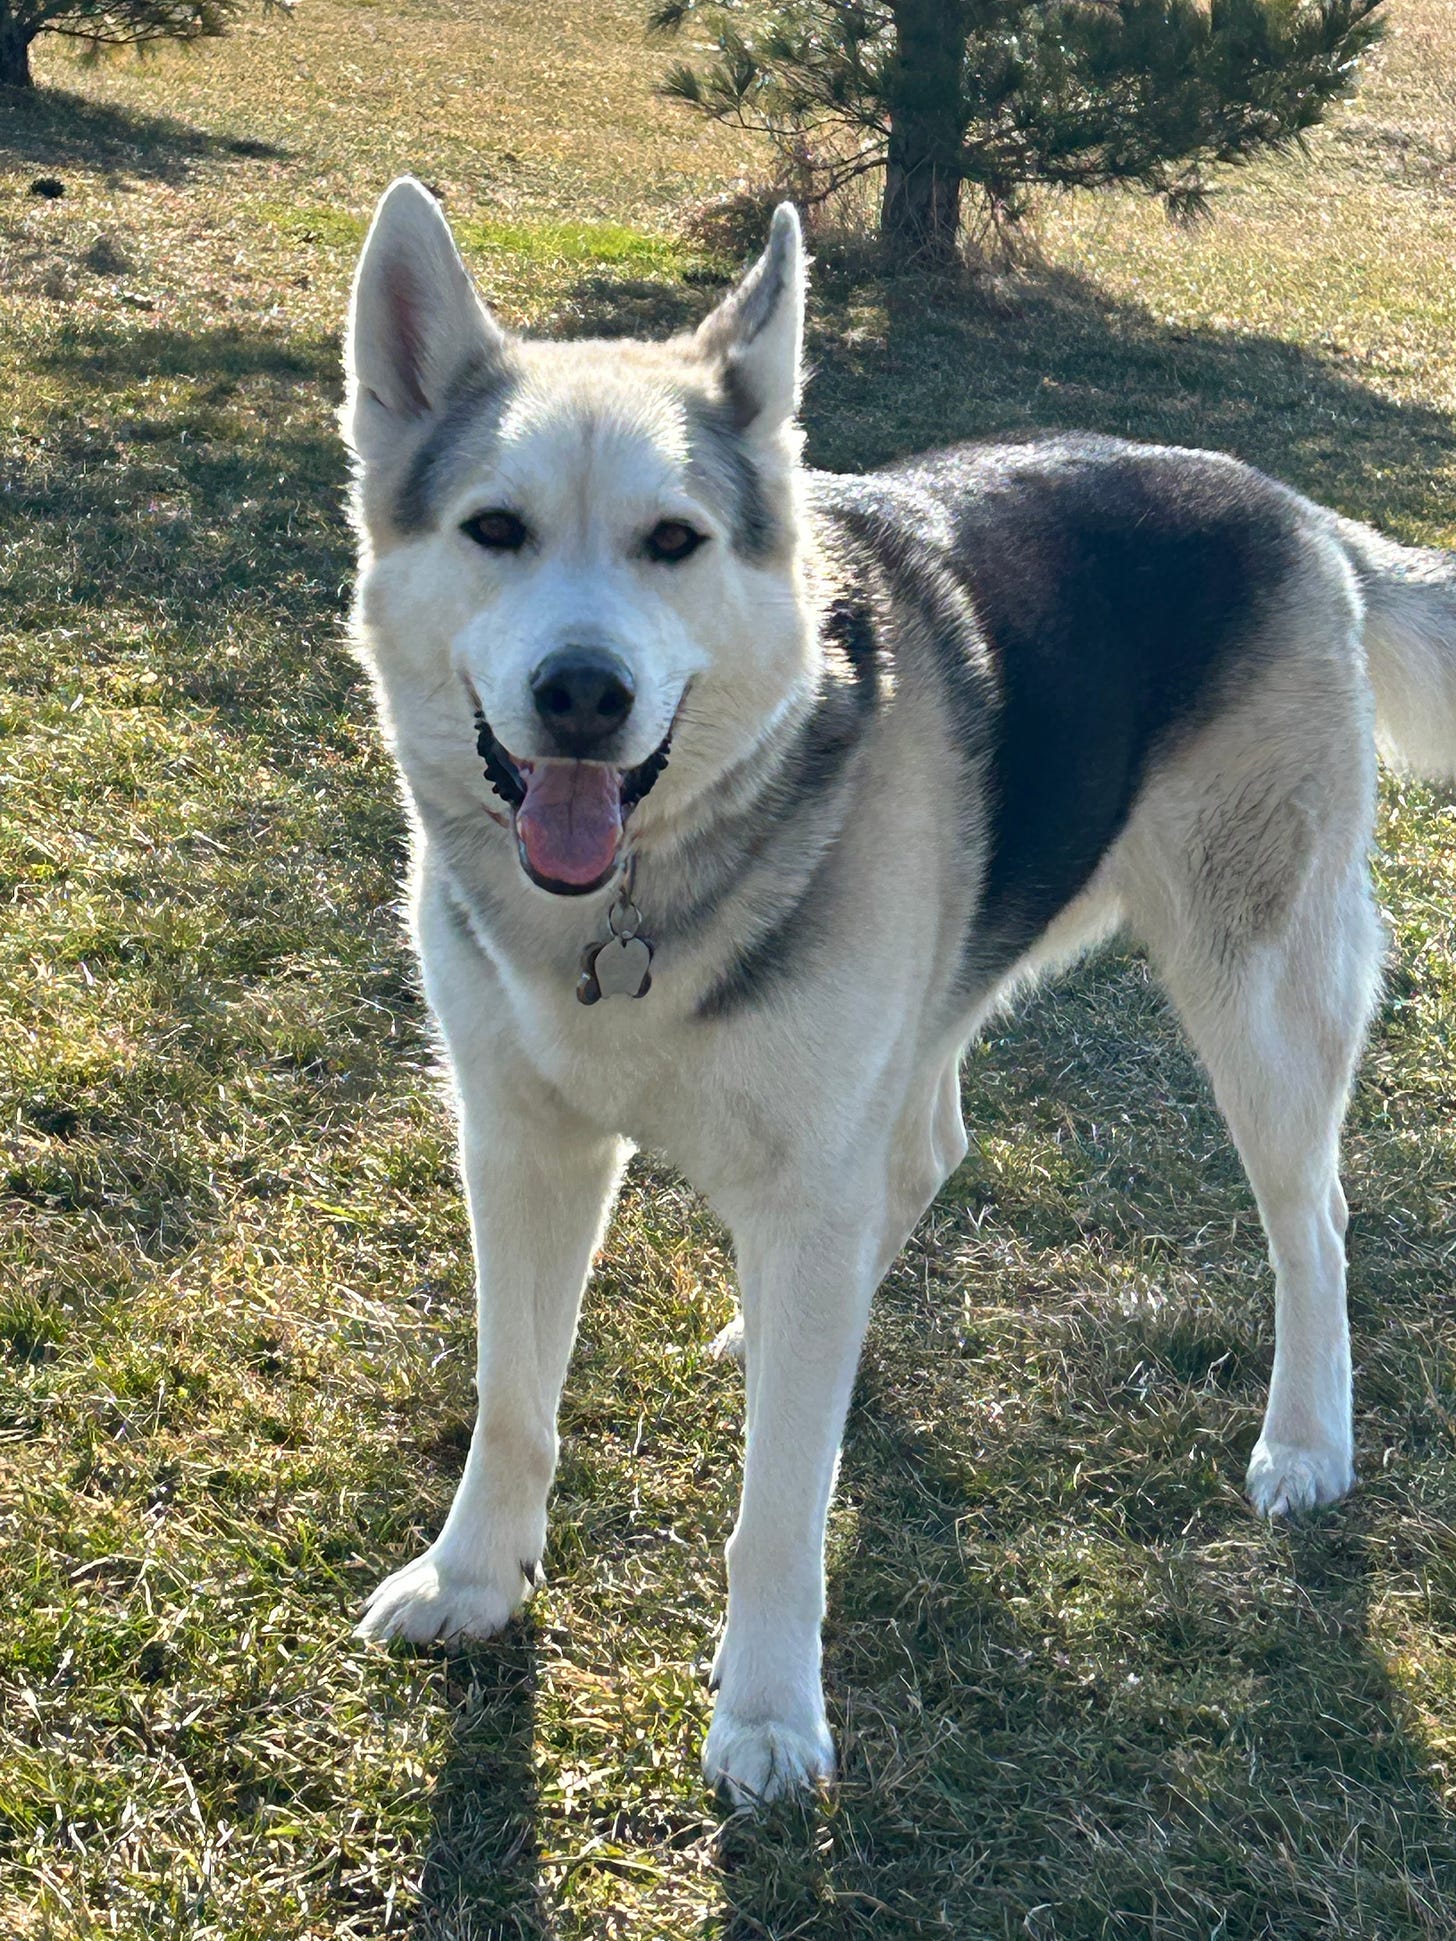 A black and white husky dog stands on green grass, in front of a pine tree, her tongue lolling out of her mouth.